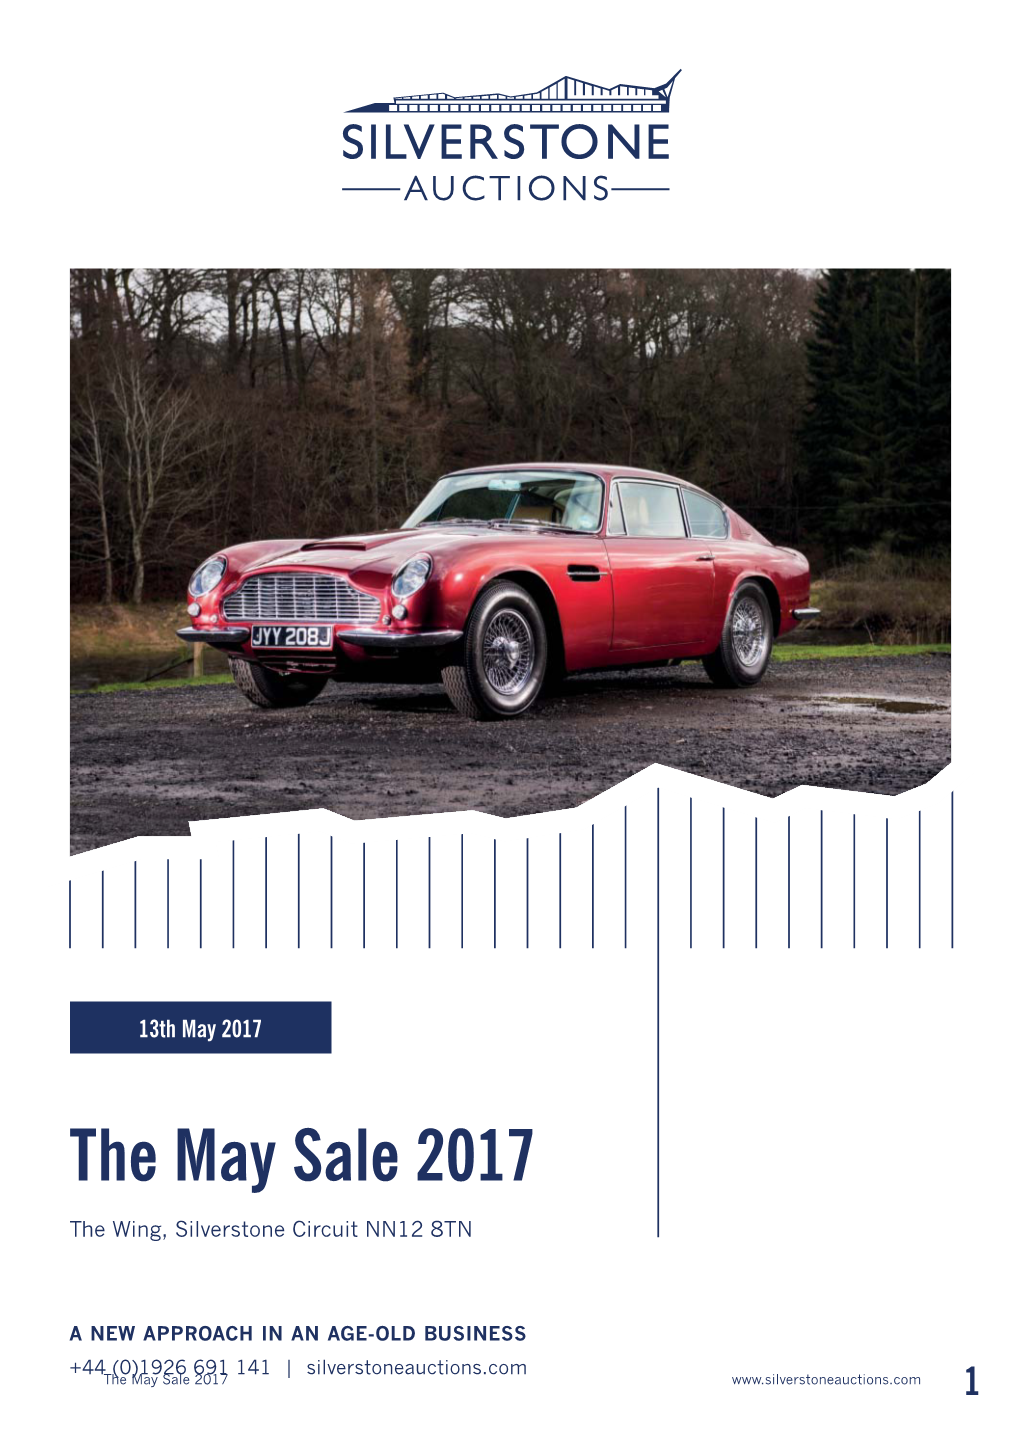 The May Sale 2017